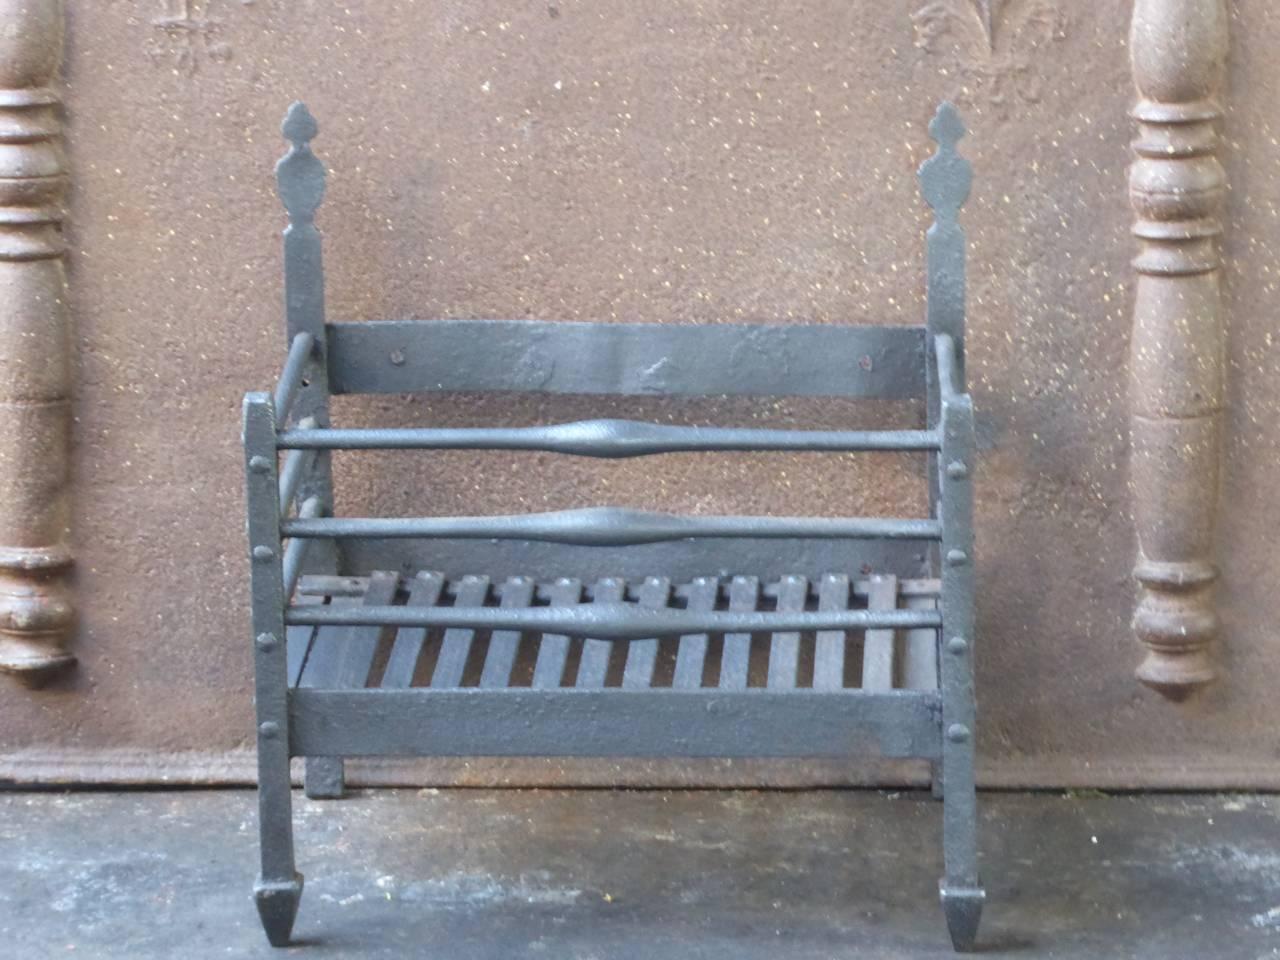 18th century English Georgian fireplace grate made of wrought iron and cast iron.

We have a unique and specialized collection of antique and used fireplace accessories consisting of more than 1000 listings at 1stdibs. Amongst others, we always have